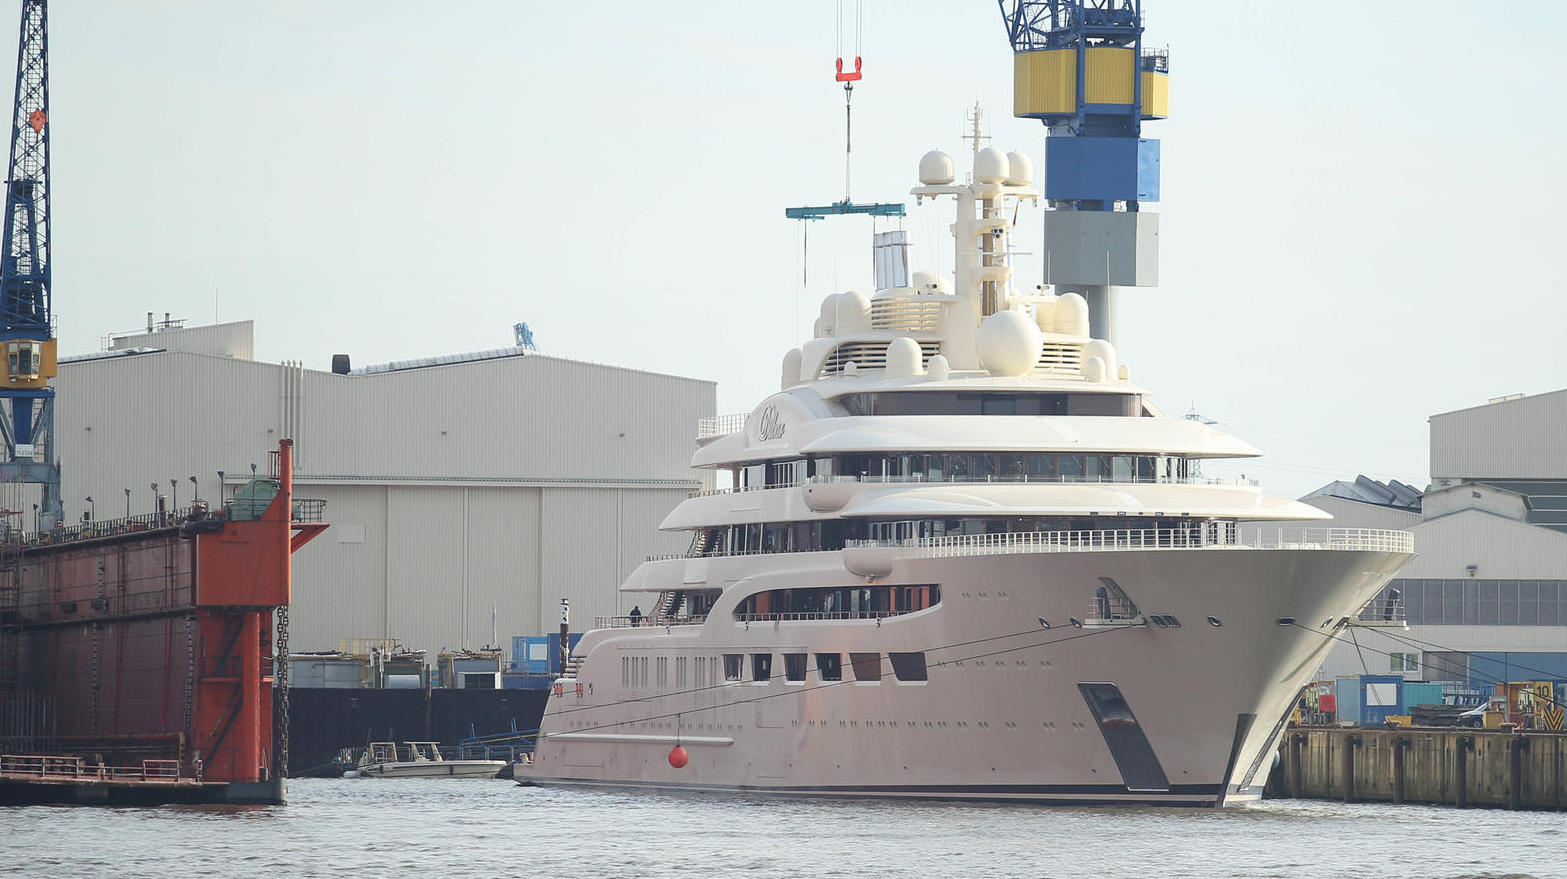 Oligarch yacht "Dilbar" officially confiscated: Usmanov's sister ship